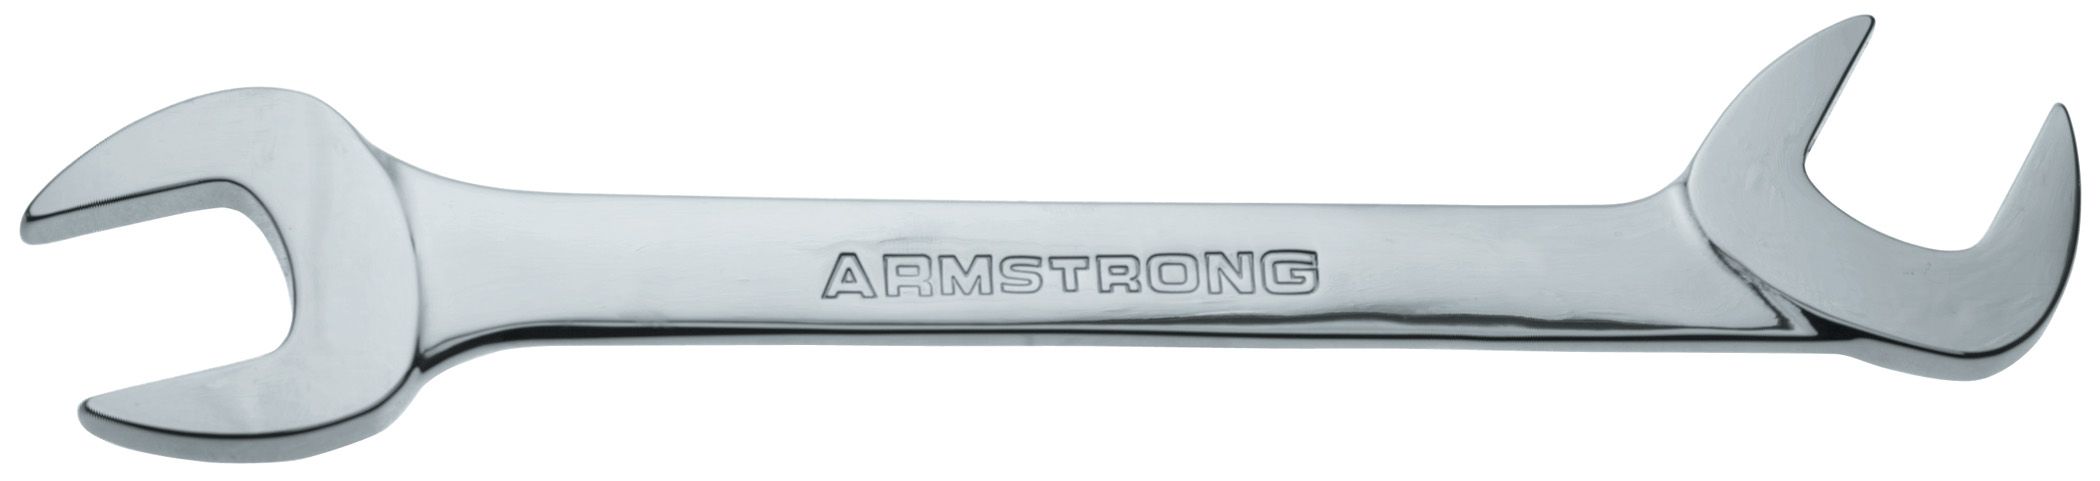 Armstrong 1-3/8 in. Satin Finish 15&deg; and 60&deg; Open End Angle Wrench